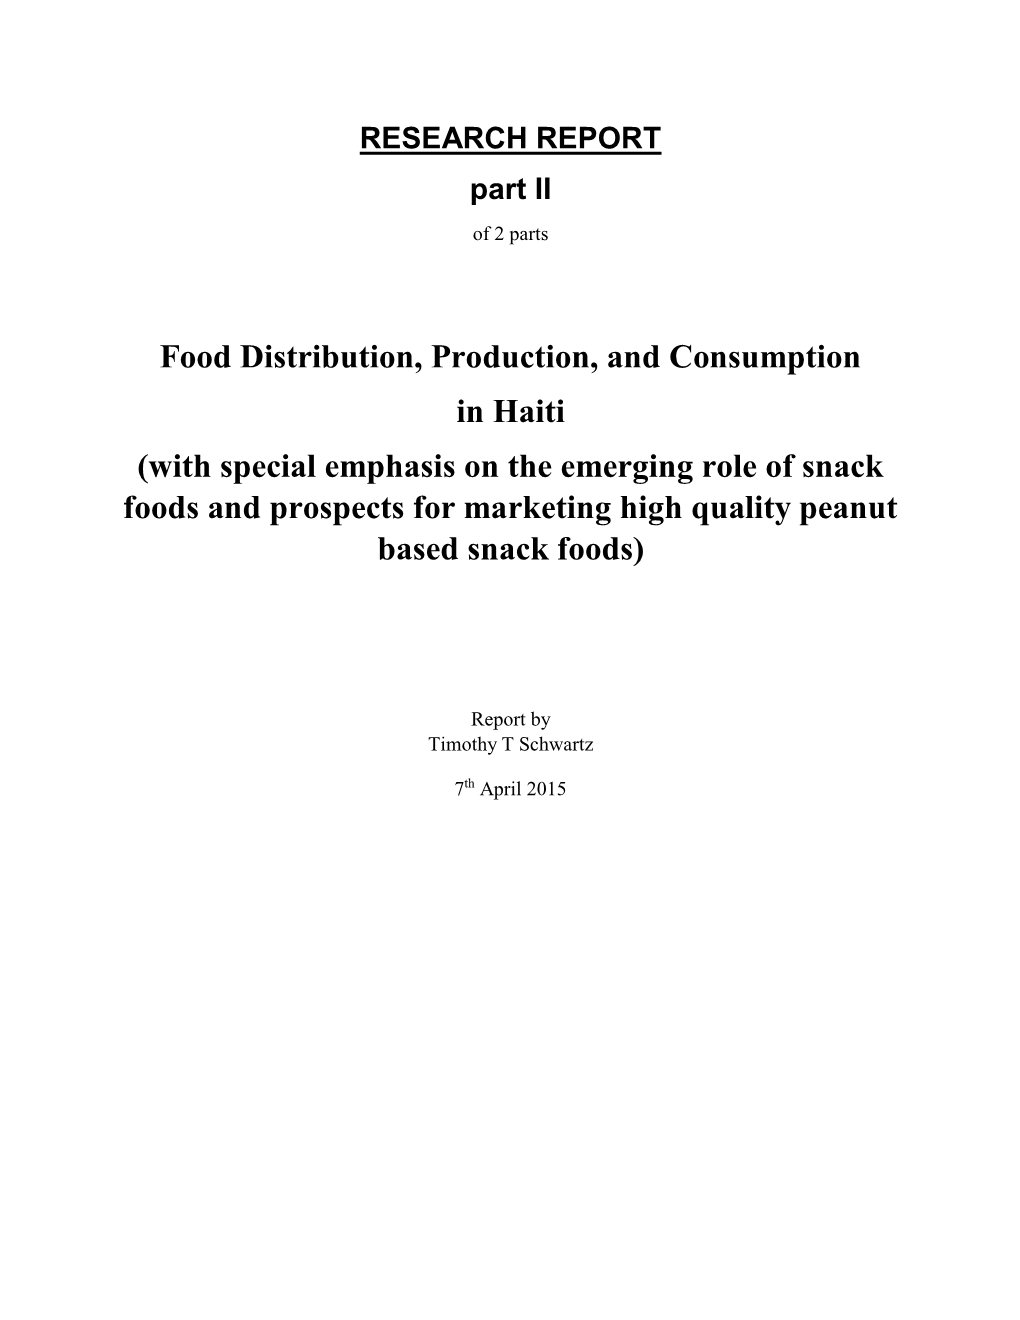 Food Distribution, Production, and Consumption in Haiti